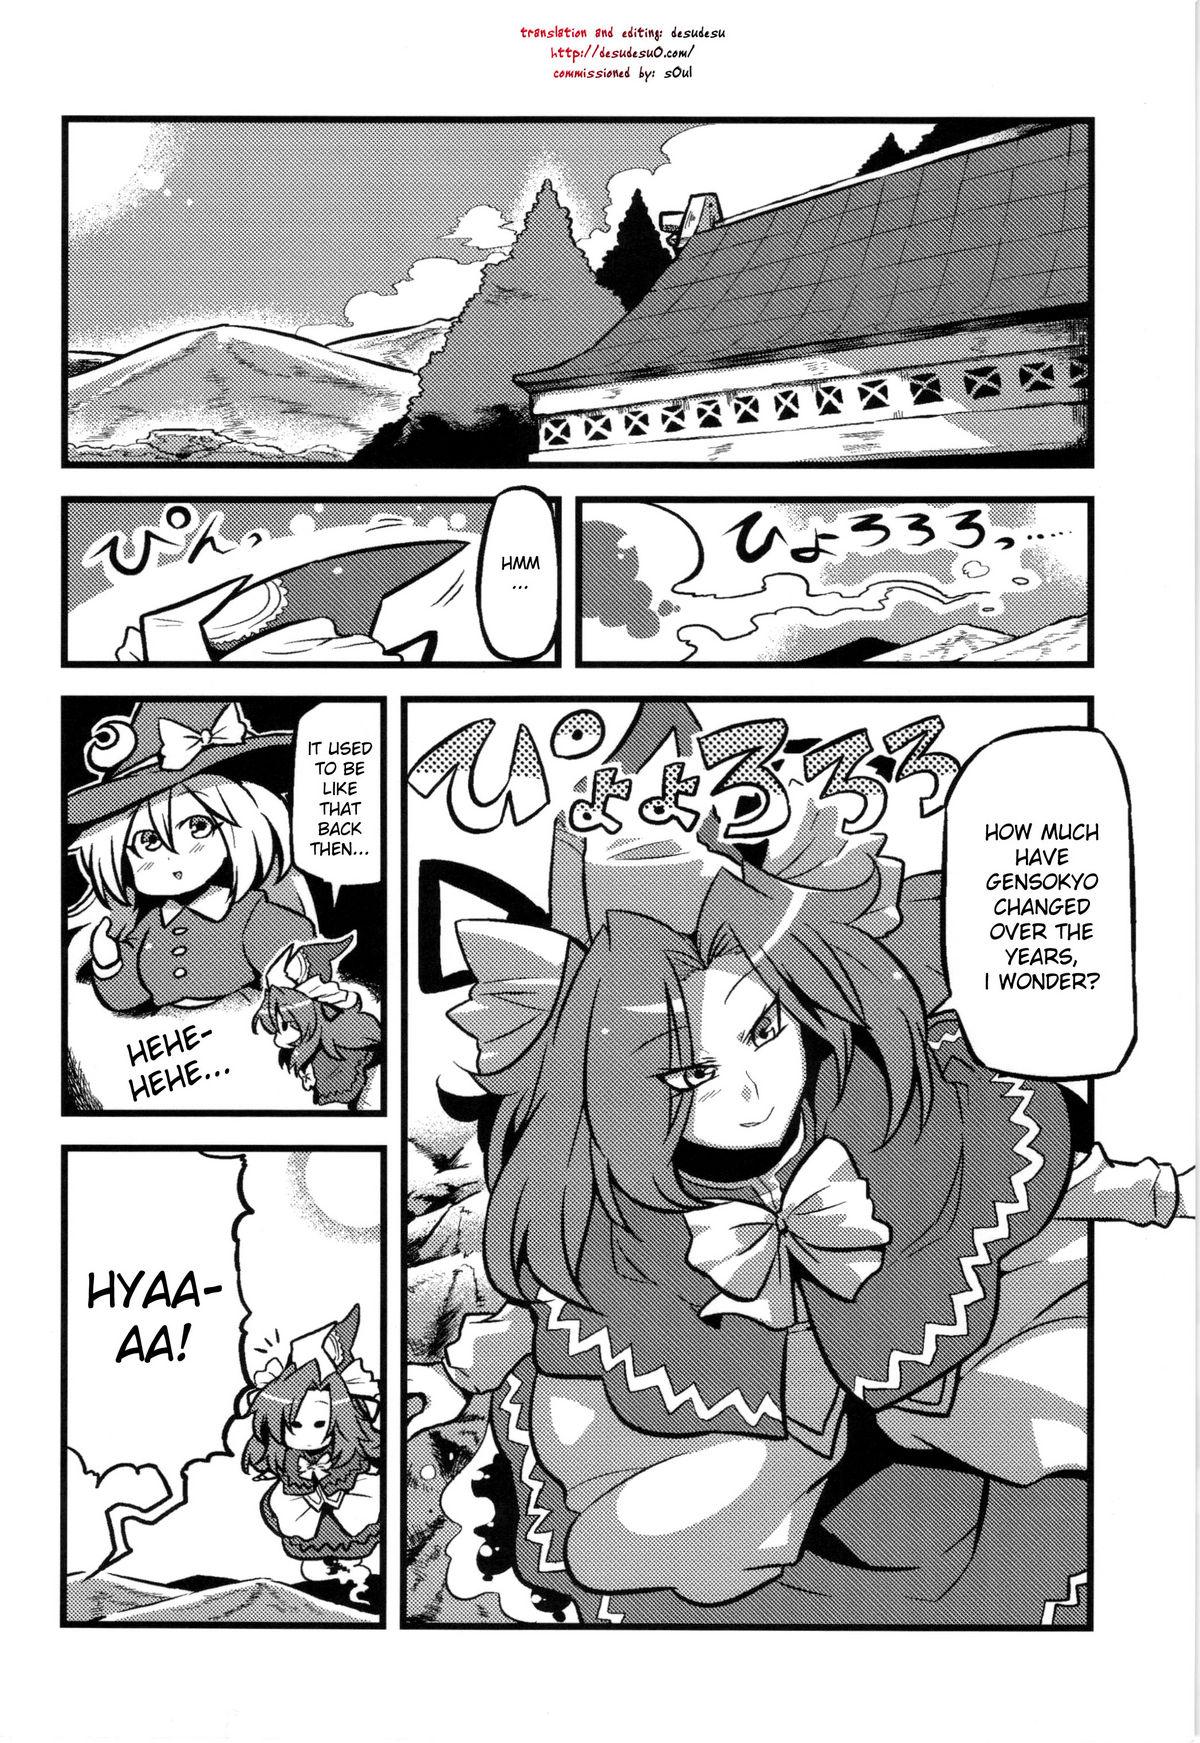 Gay Orgy Mima-sama Yume Mousou | Mima sama's Dream Delusions - Touhou project Gay Trimmed - Page 4